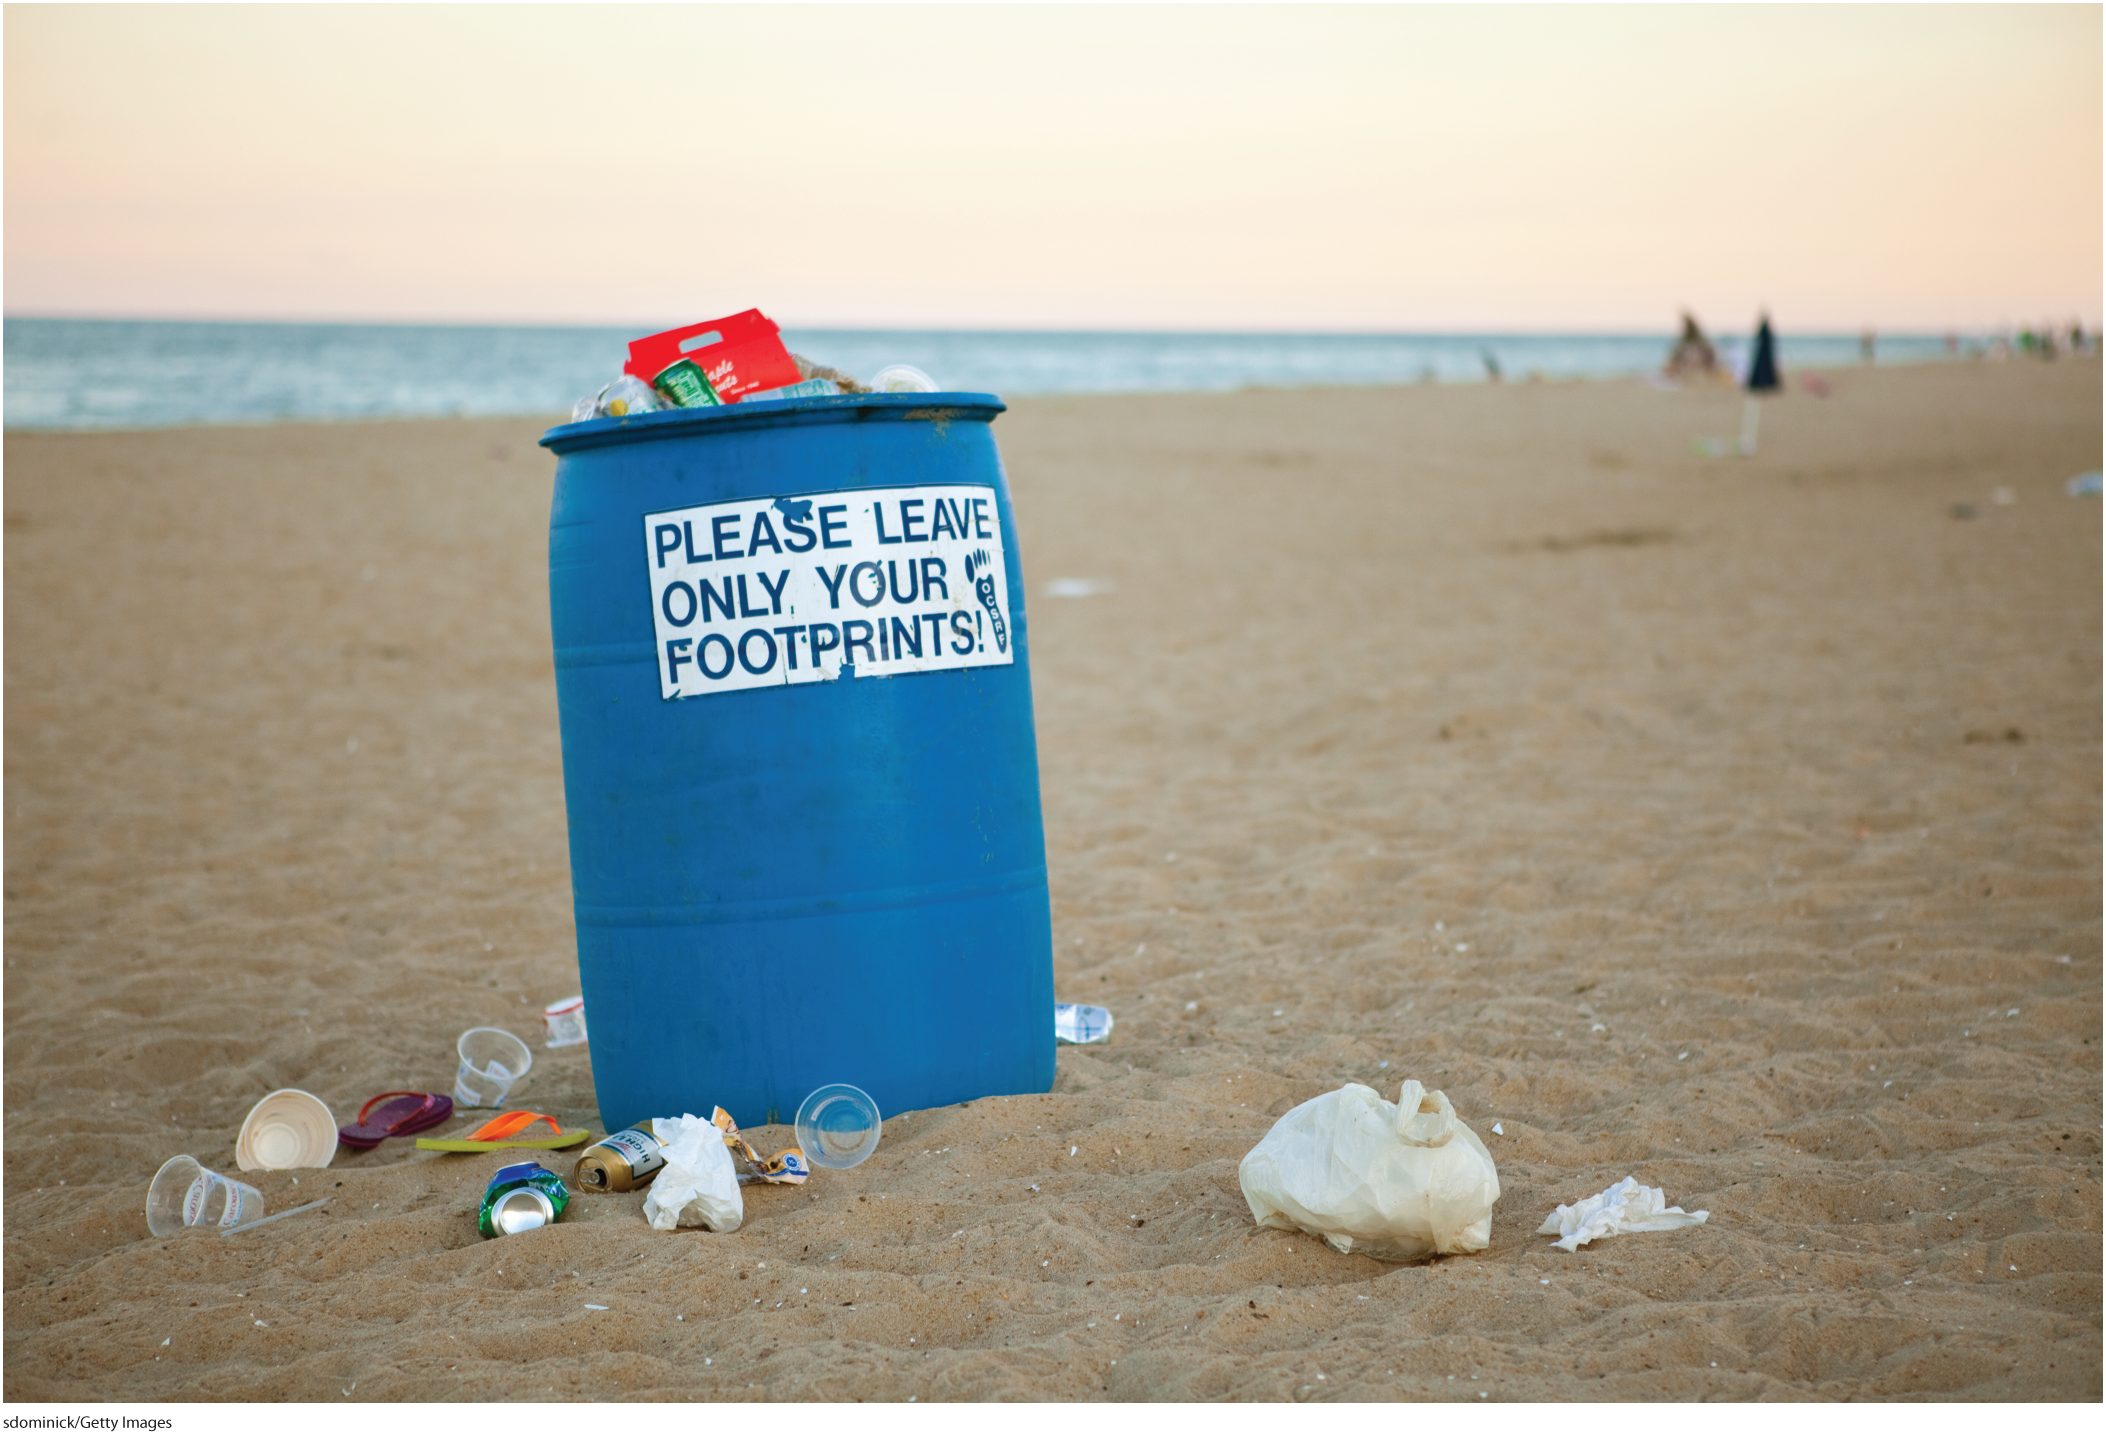 A photo shows a trash can filled with garbage placed in the middle of a beach. The text written on the bin reads, Please leave only your footprints.